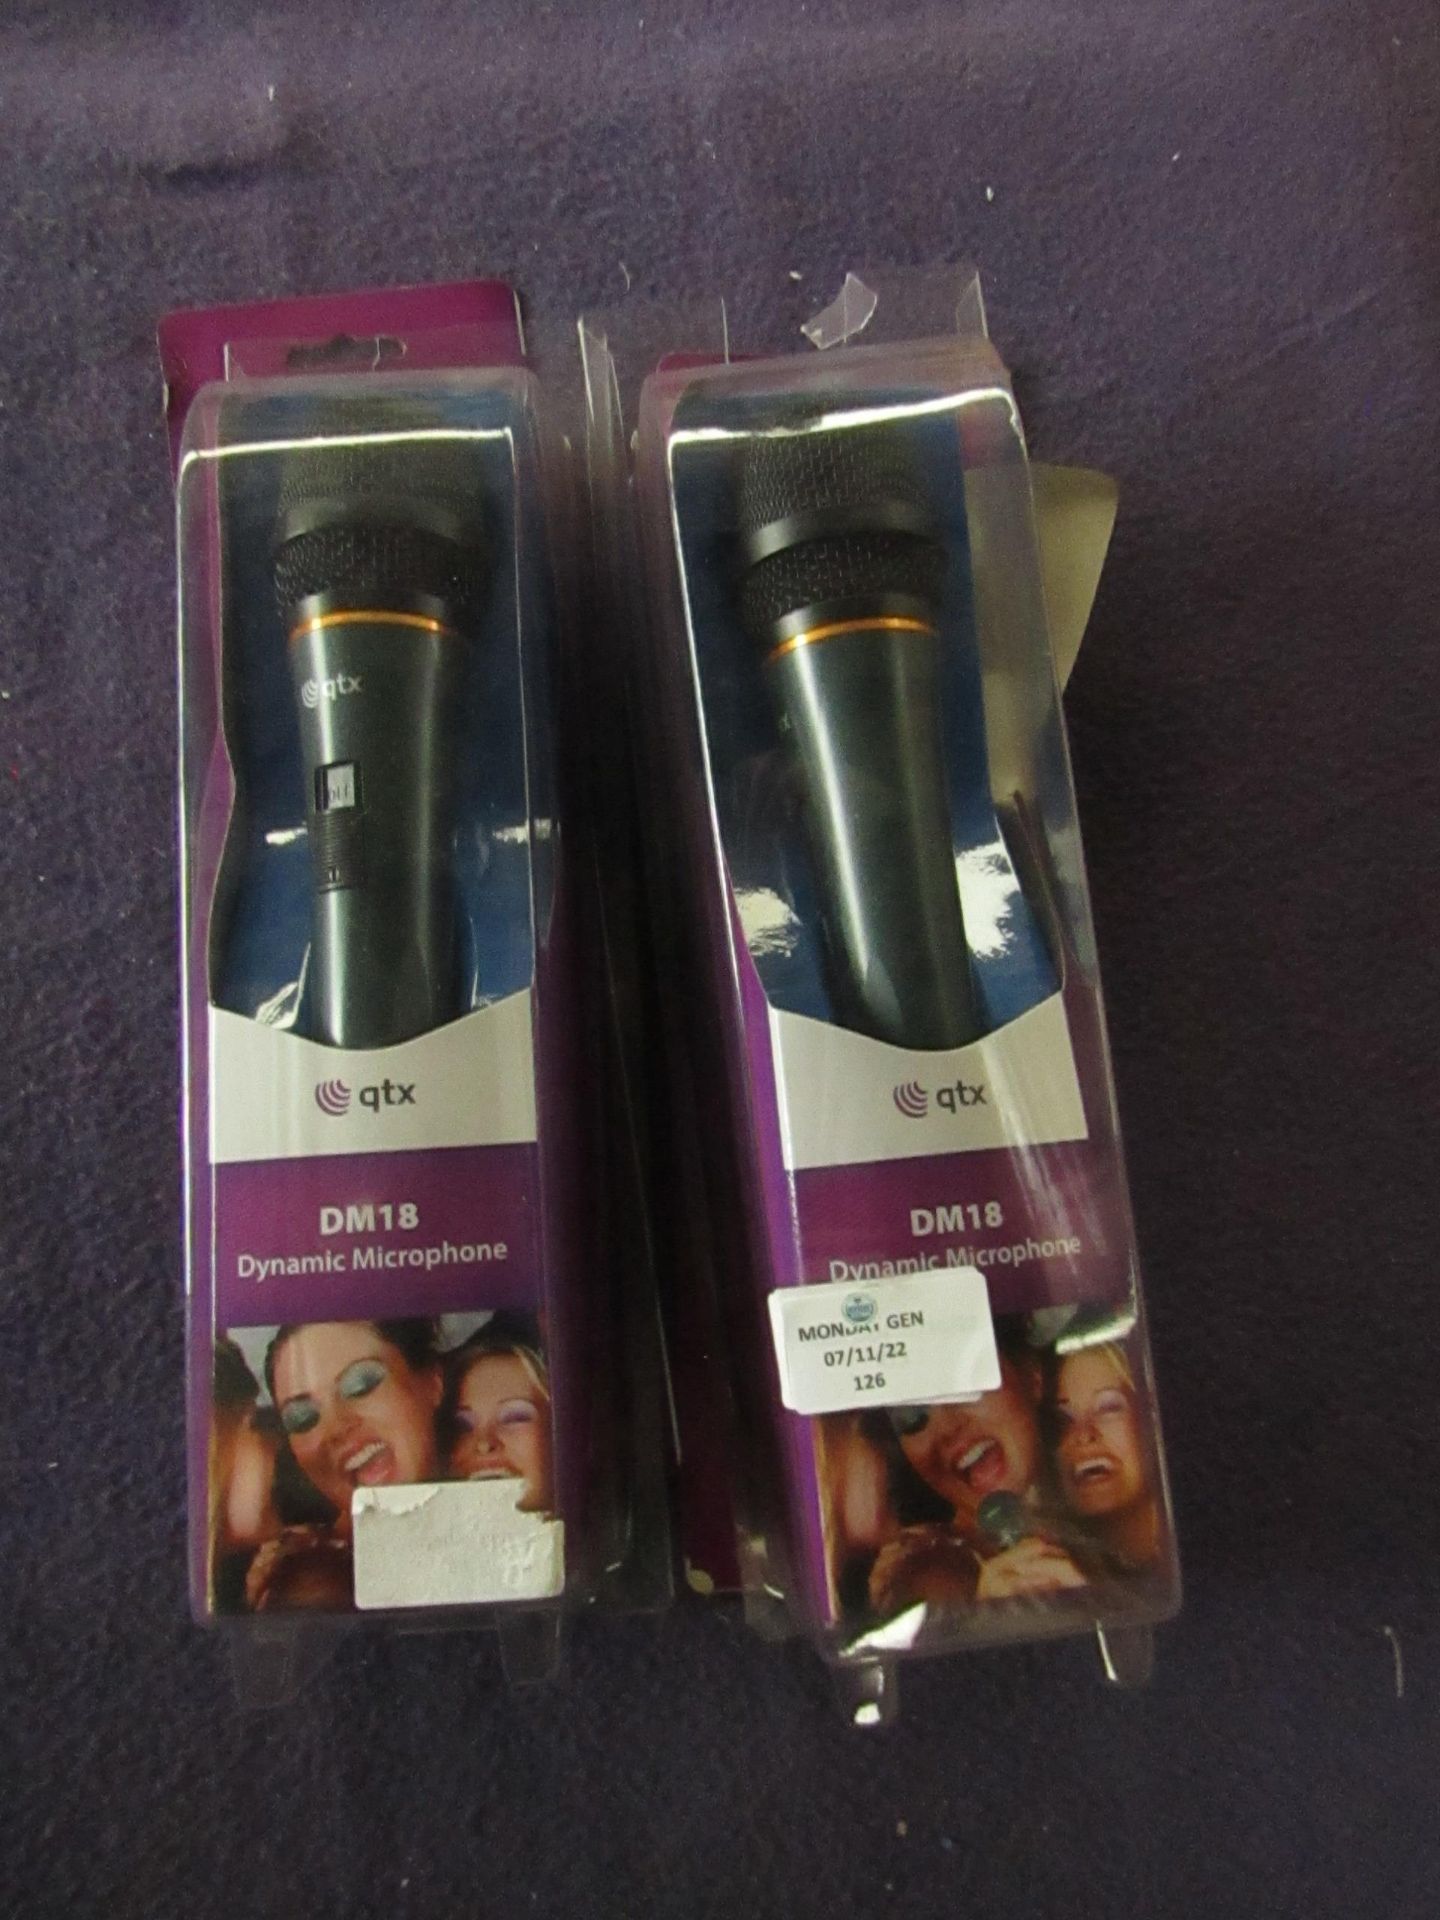 2x QTX - Dynamic Microphone ( DM18 ) - Good Condition, Packaging Damaged.